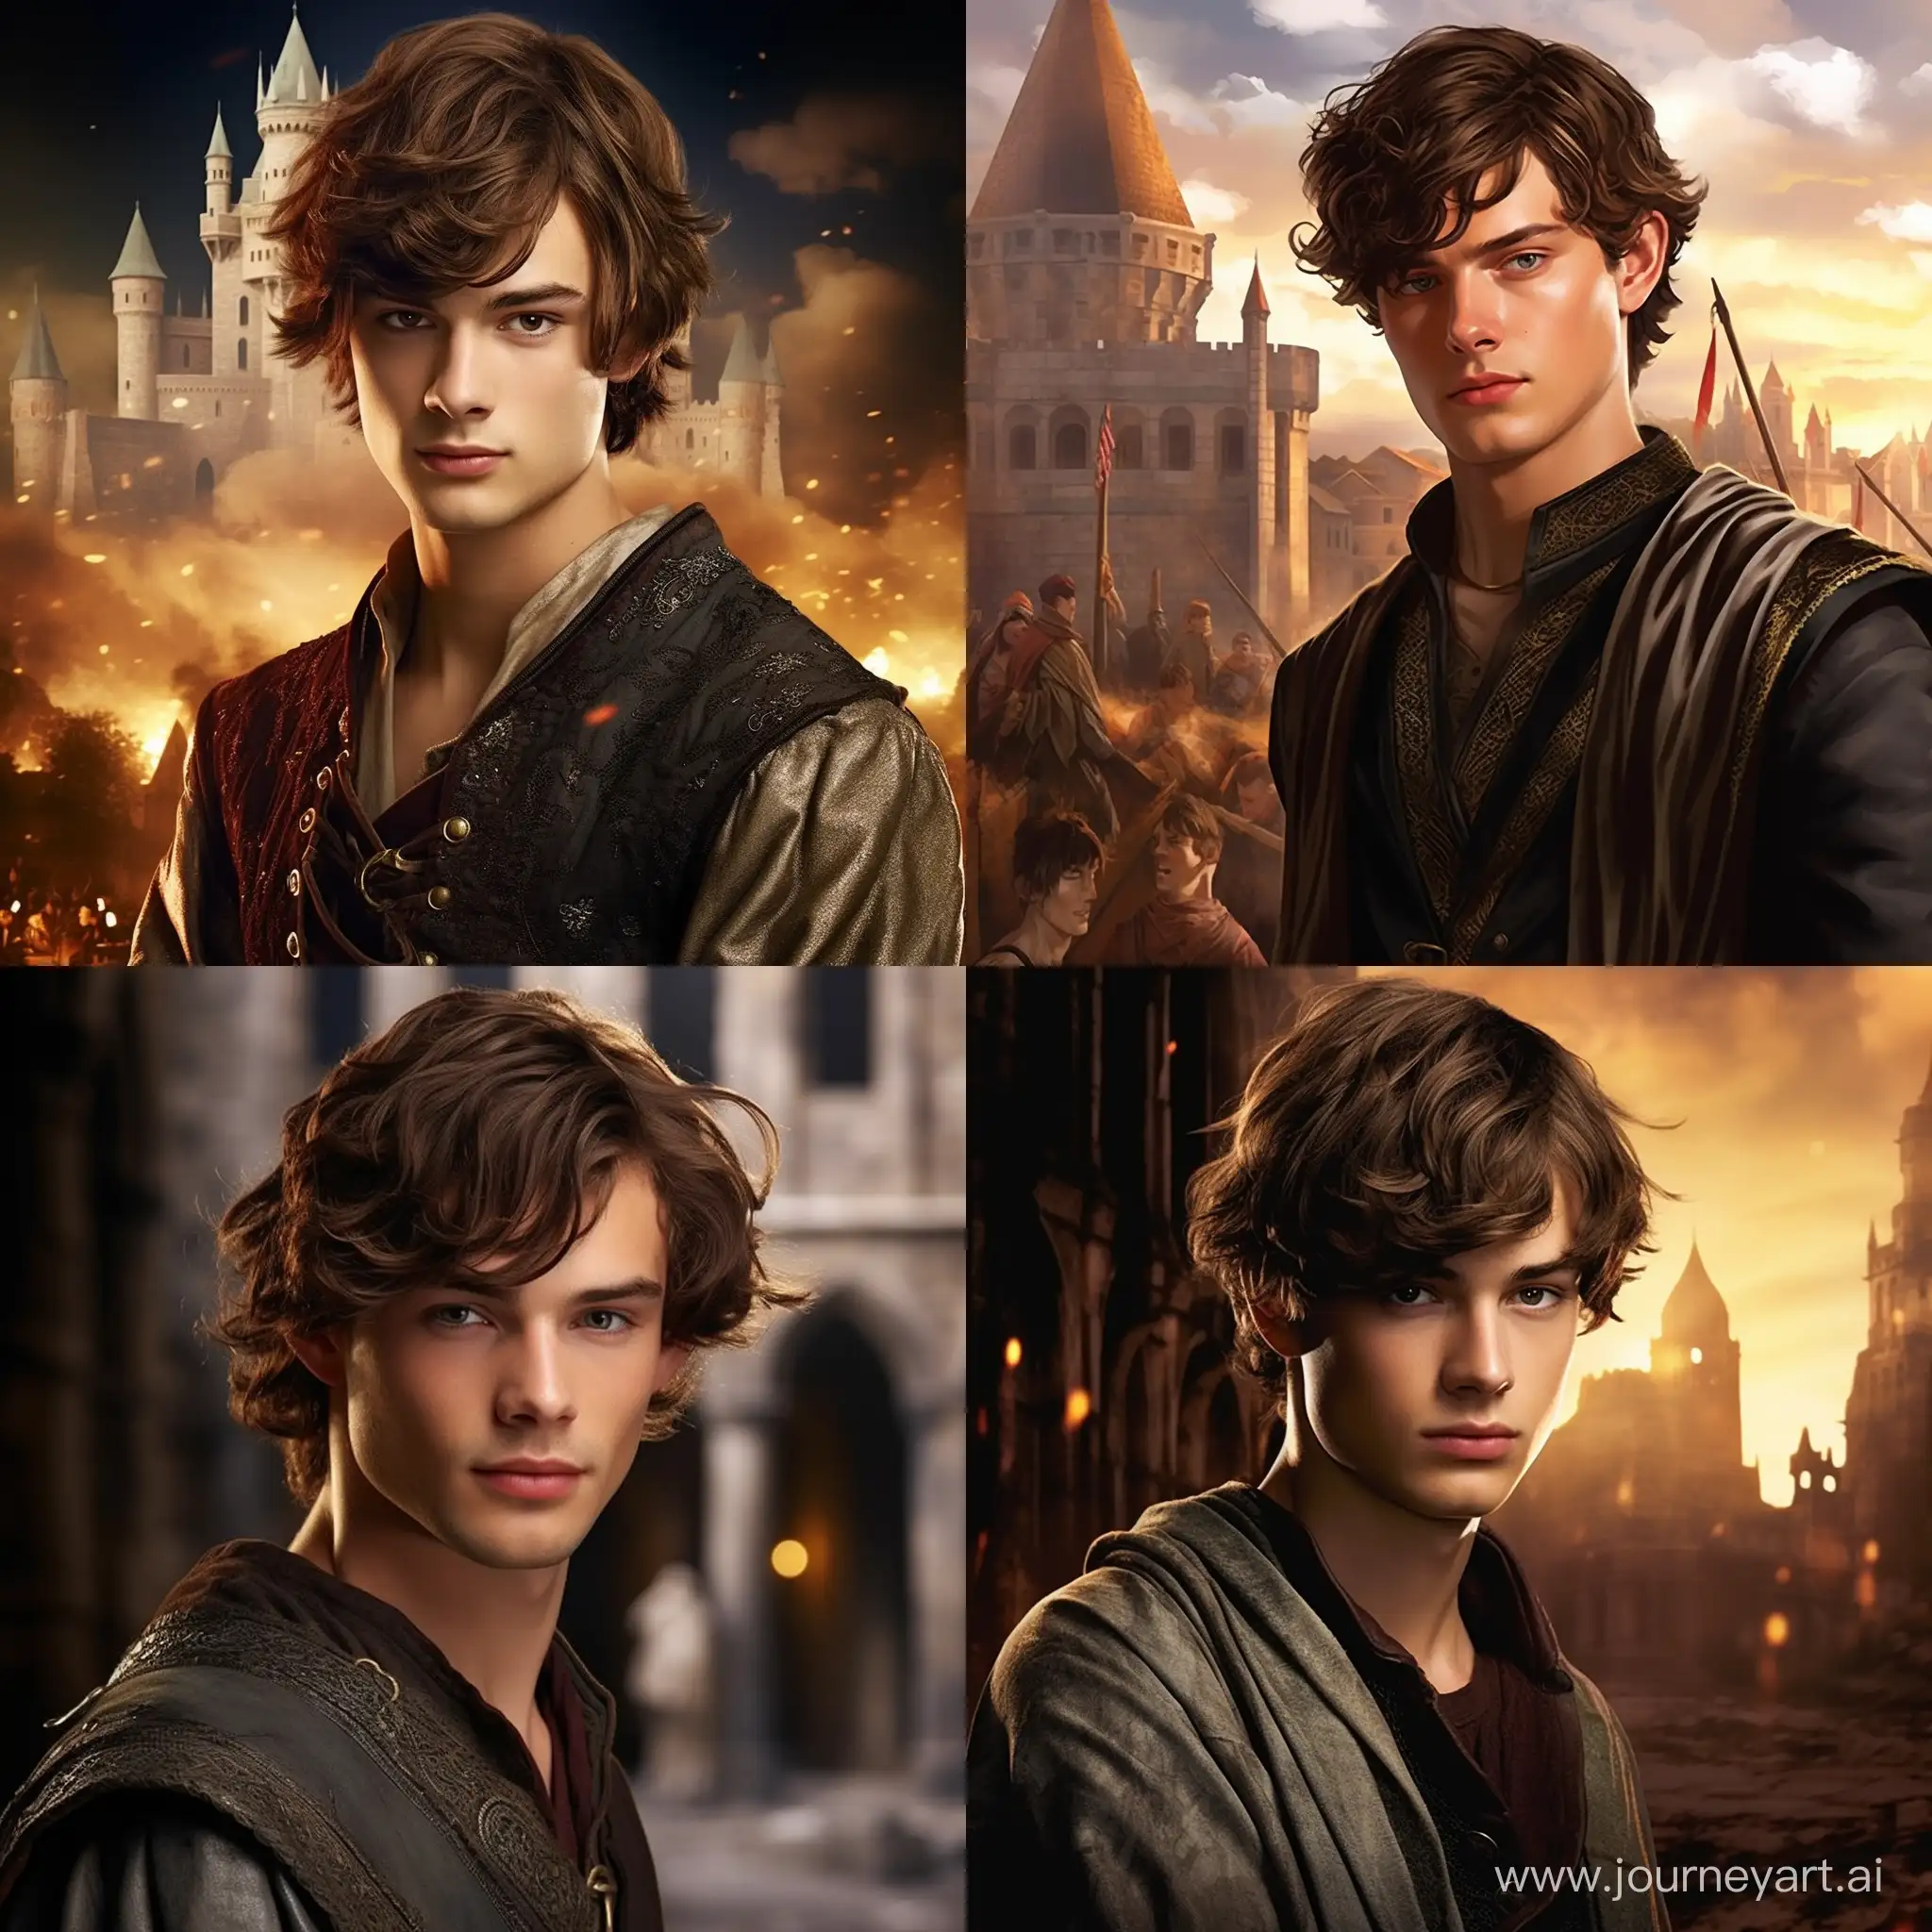 Generate an image set against the backdrop of a medieval city, portraying a 22-year-old governor's son with tousled brown hair, gray eyes, and a rugged face marked by subtle wrinkles. Include a crystal hanging around his neck, radiating a mystical light. Capture his confident presence and alluring charm within the enchanting atmosphere of a medieval urban landscape, lord of the rings style